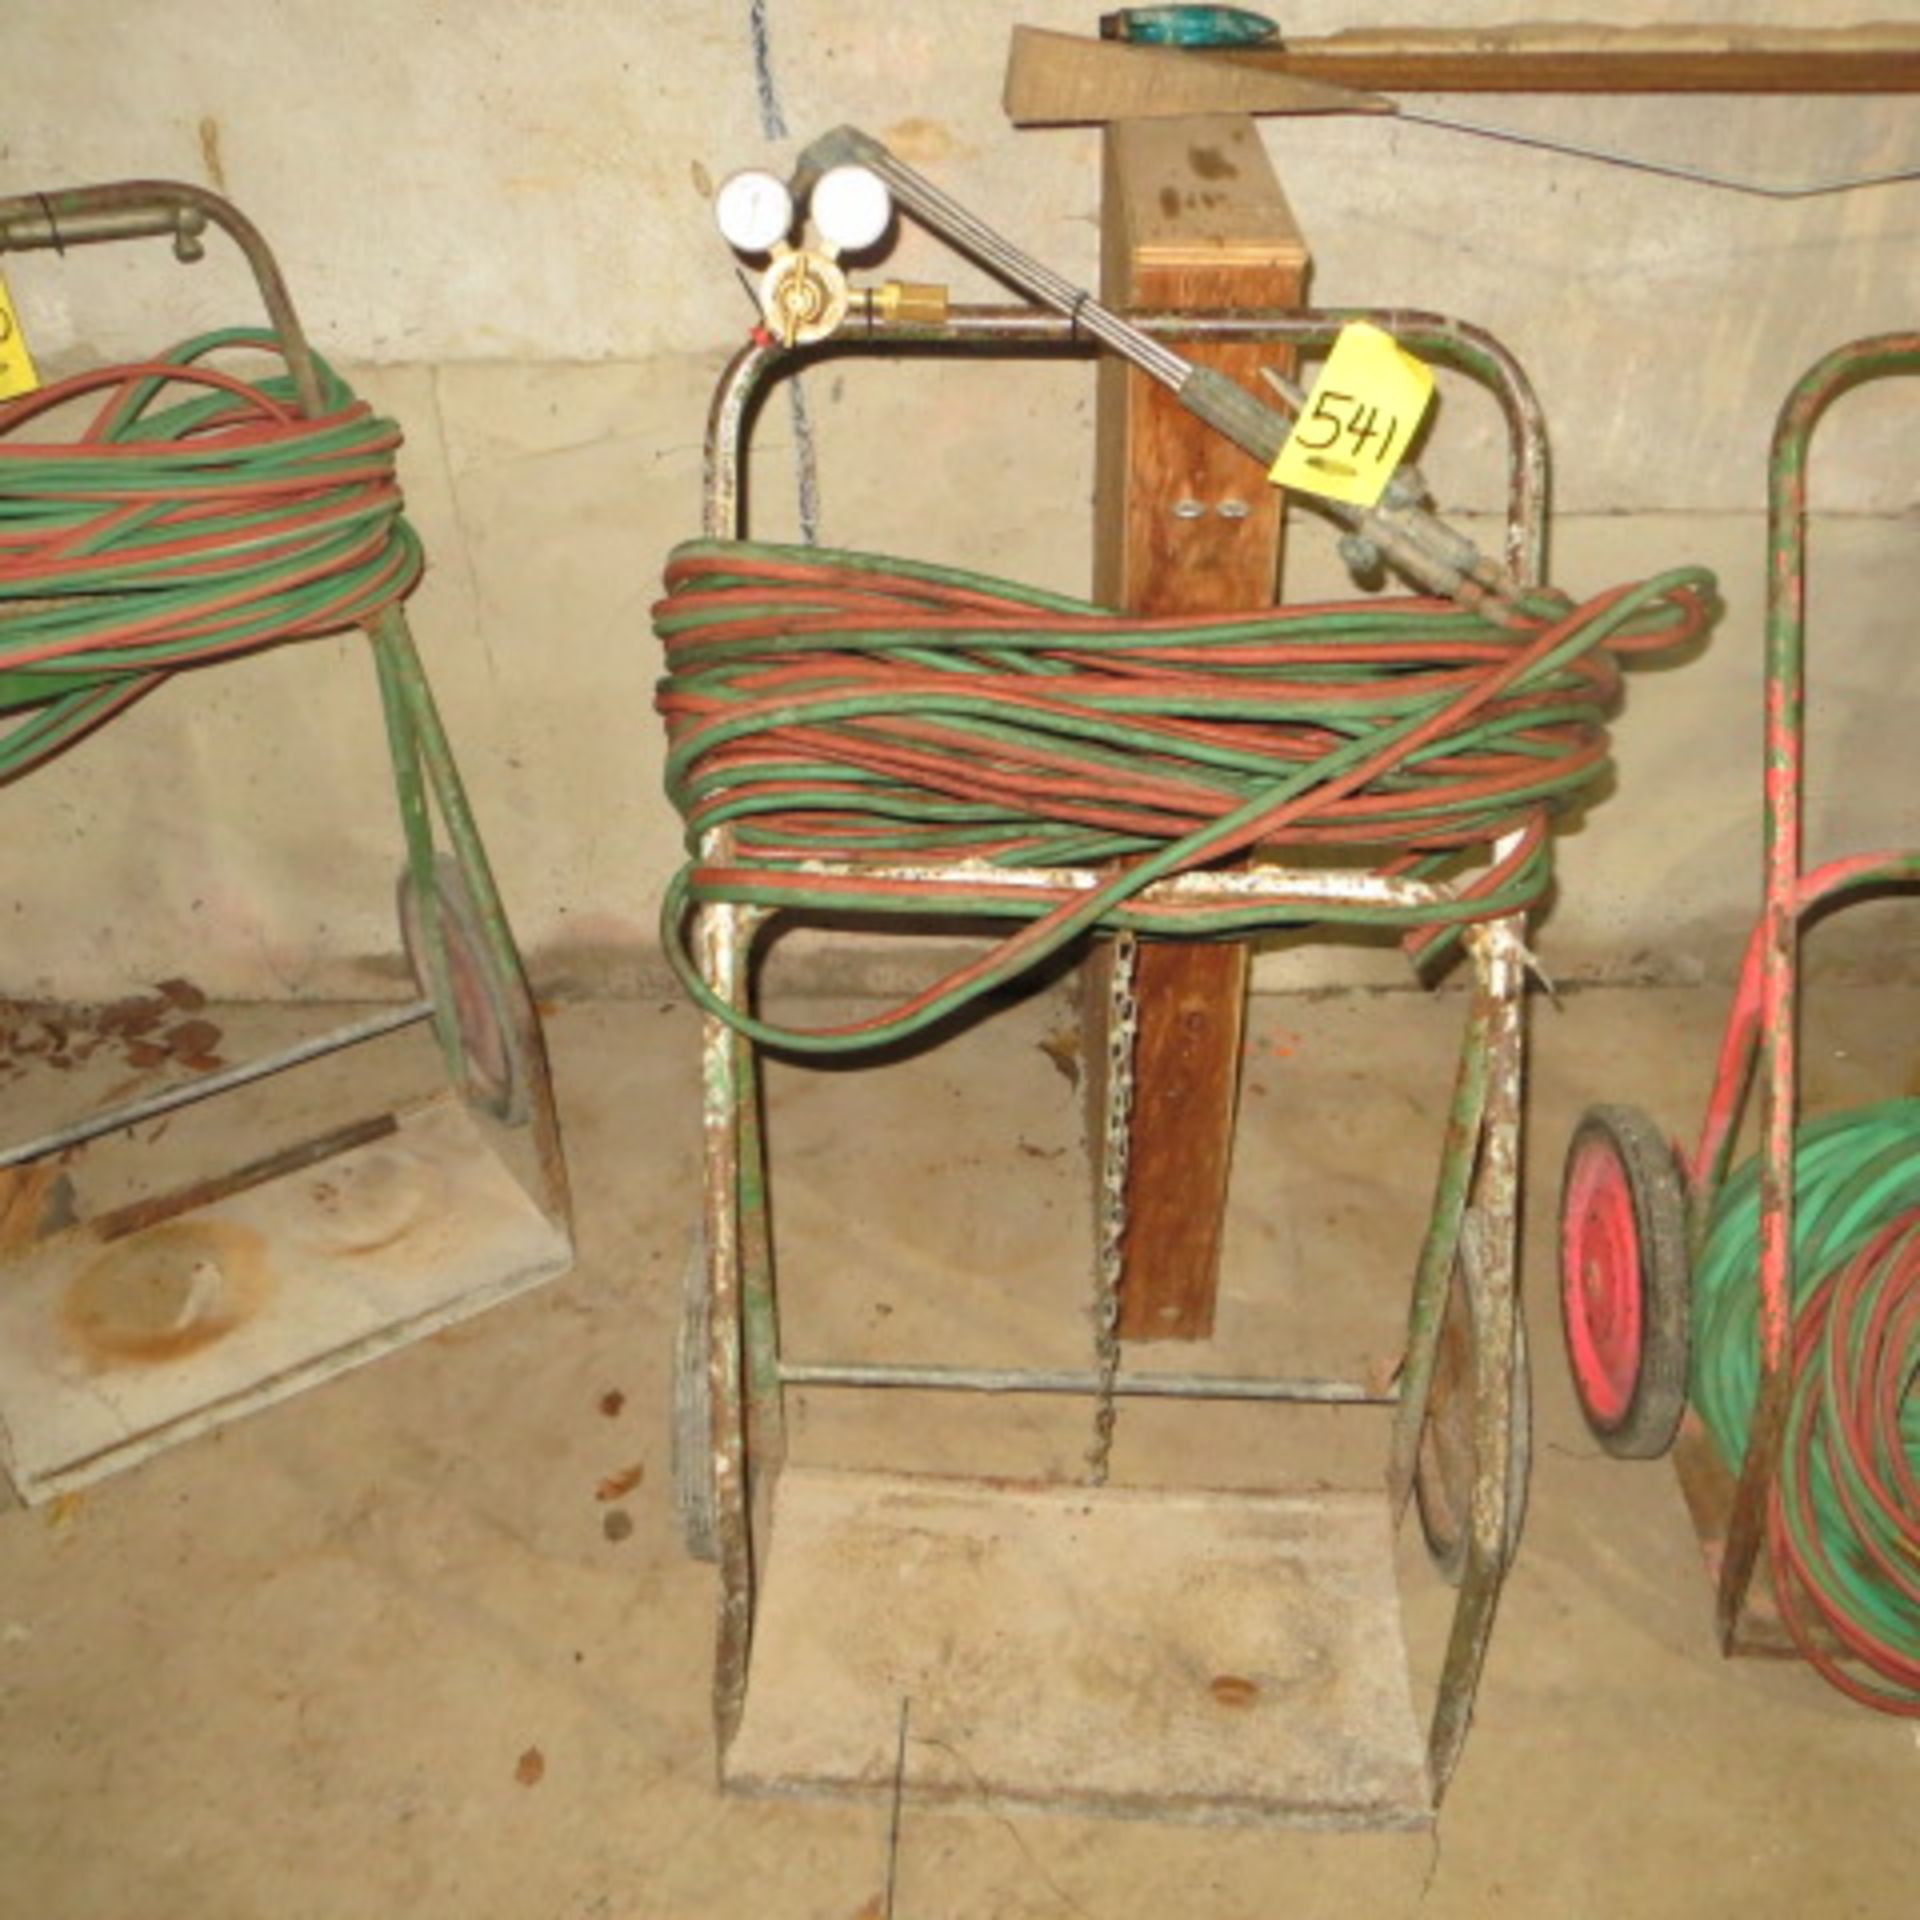 OXY-ACETYLENE BURNING UNITS W/CART, TORCH, GAUGE & LINES